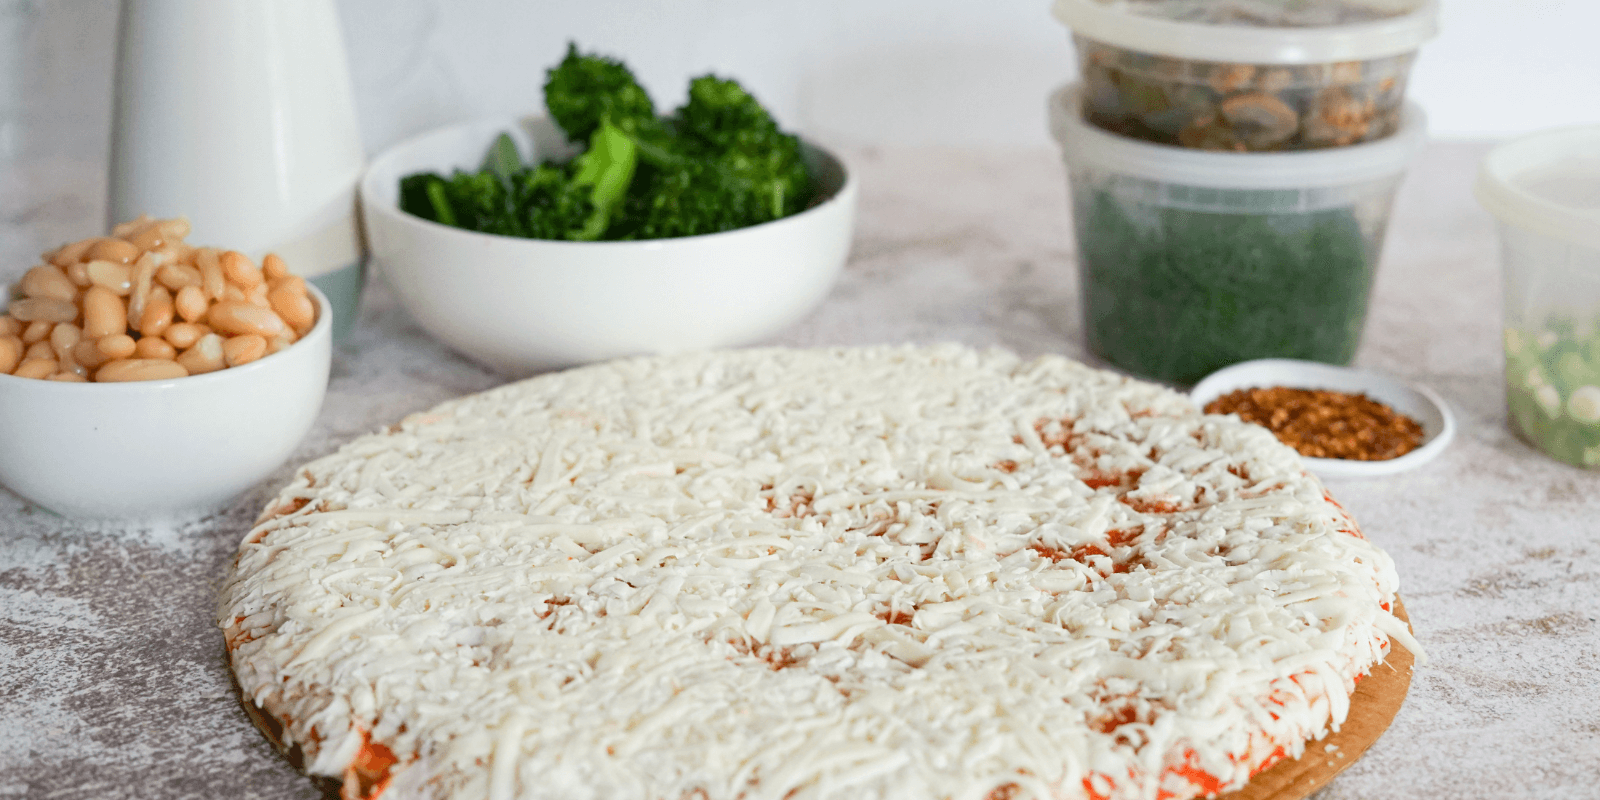 Top your frozen pizza with leftovers